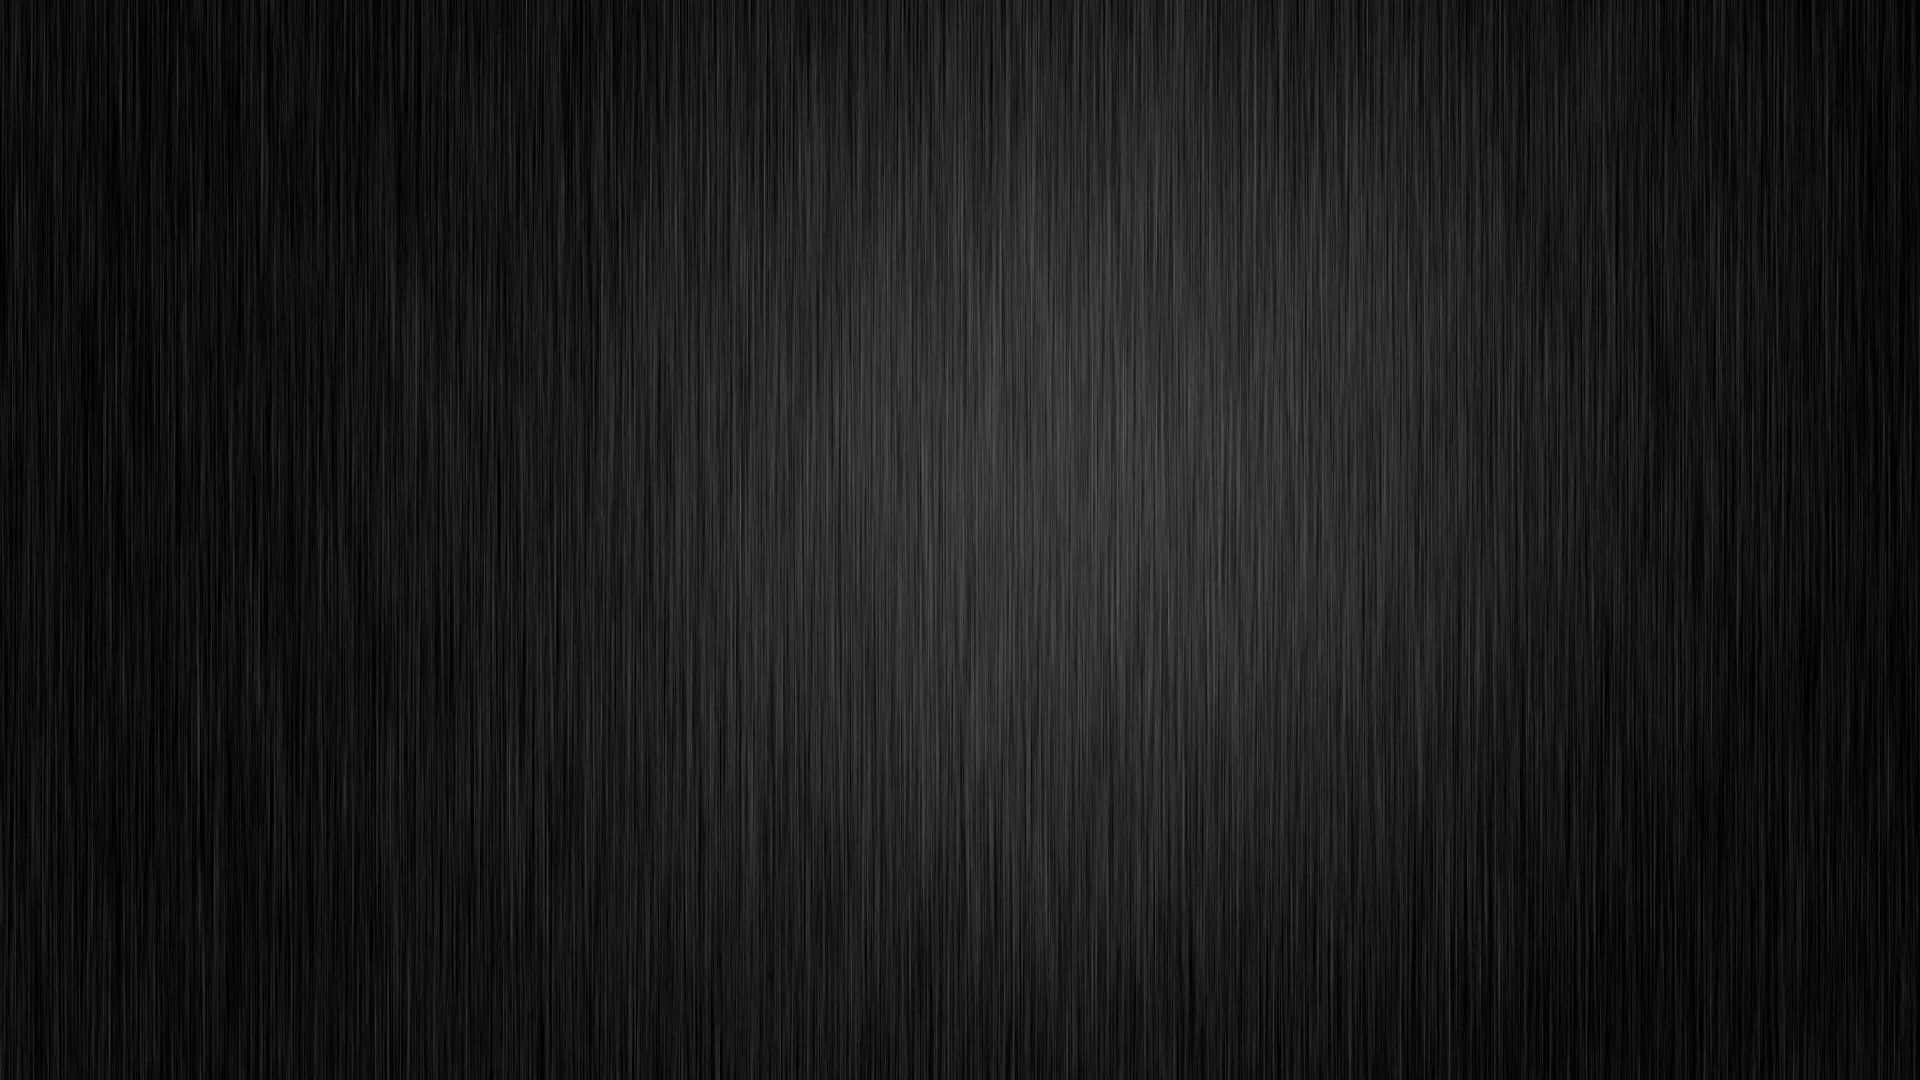 Add Vibrancy to Your Screen with a Black Gradient Wallpaper